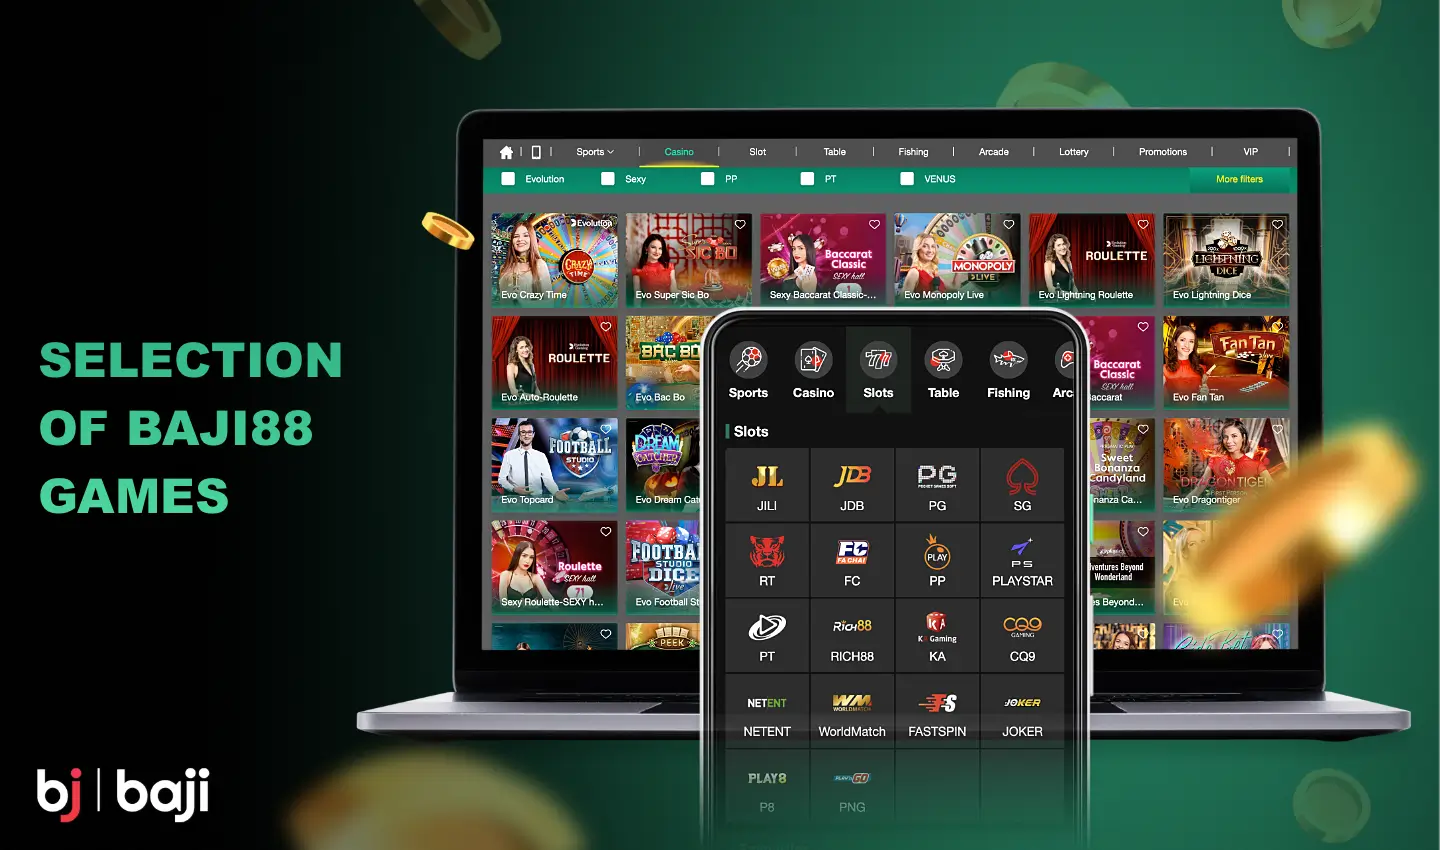 Baji 888 offers Bangladeshi users hundreds of exciting games ranging from slot machines, arcade games, blackjack, roulette, live dealer games and lotteries